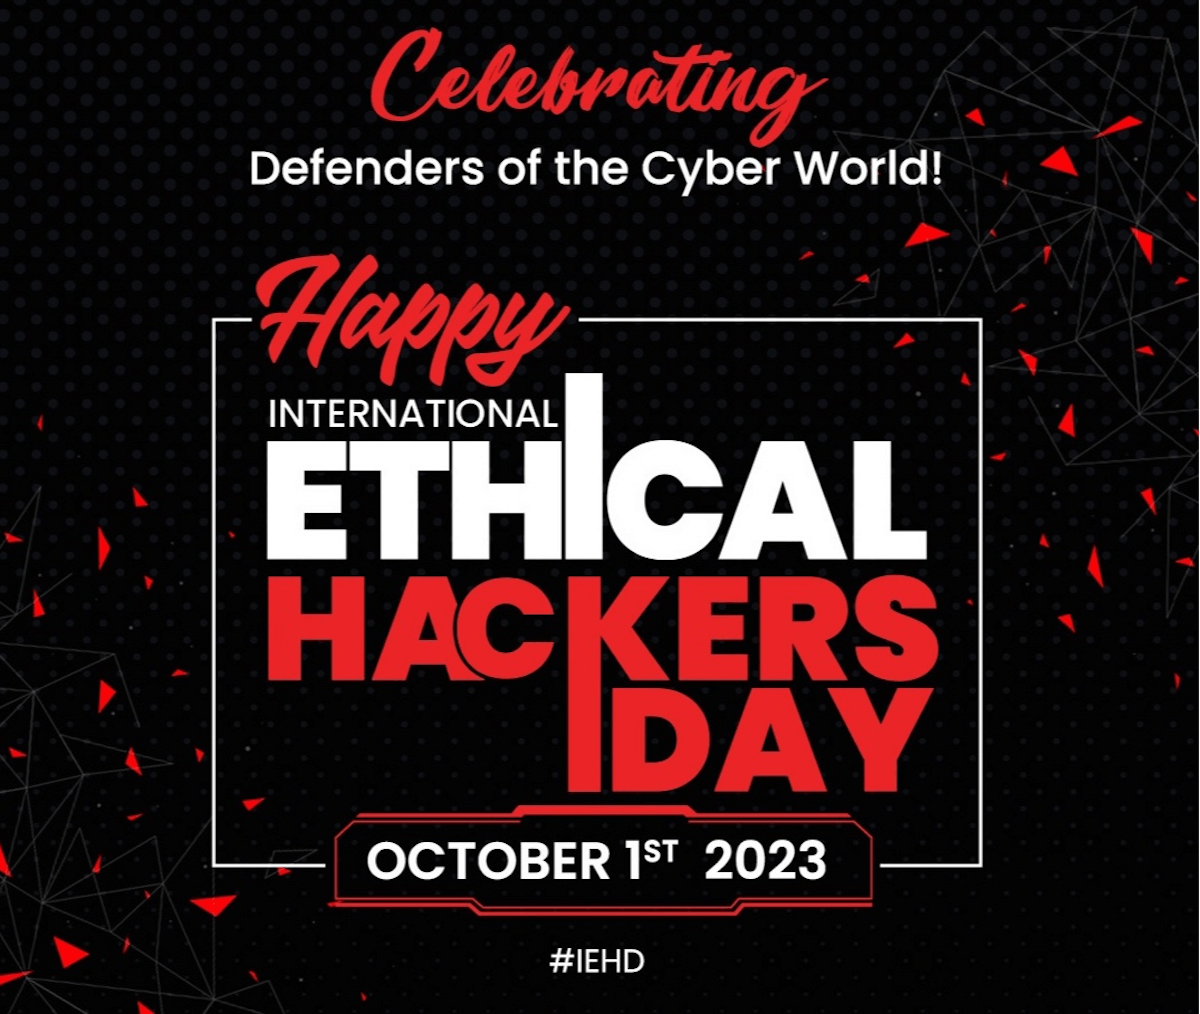 featured image - Global Celebration Marks International Ethical Hackers Day on October 1st